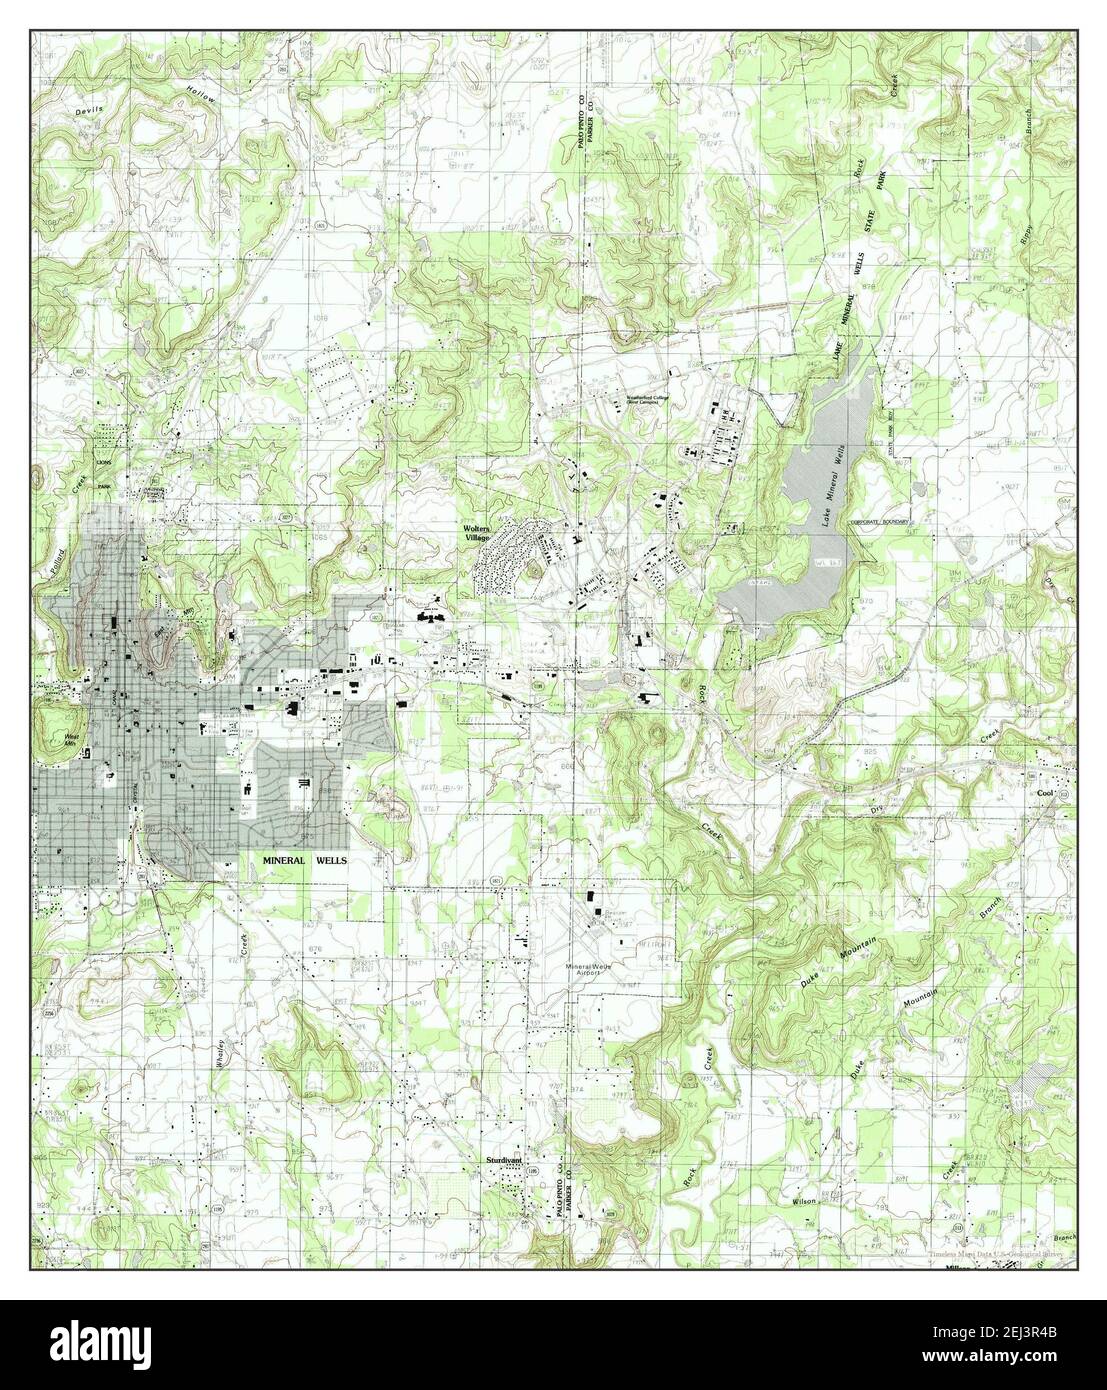 Mineral Wells East, Texas, map 1984, 1:24000, United States of America by Timeless Maps, data U.S. Geological Survey Foto Stock